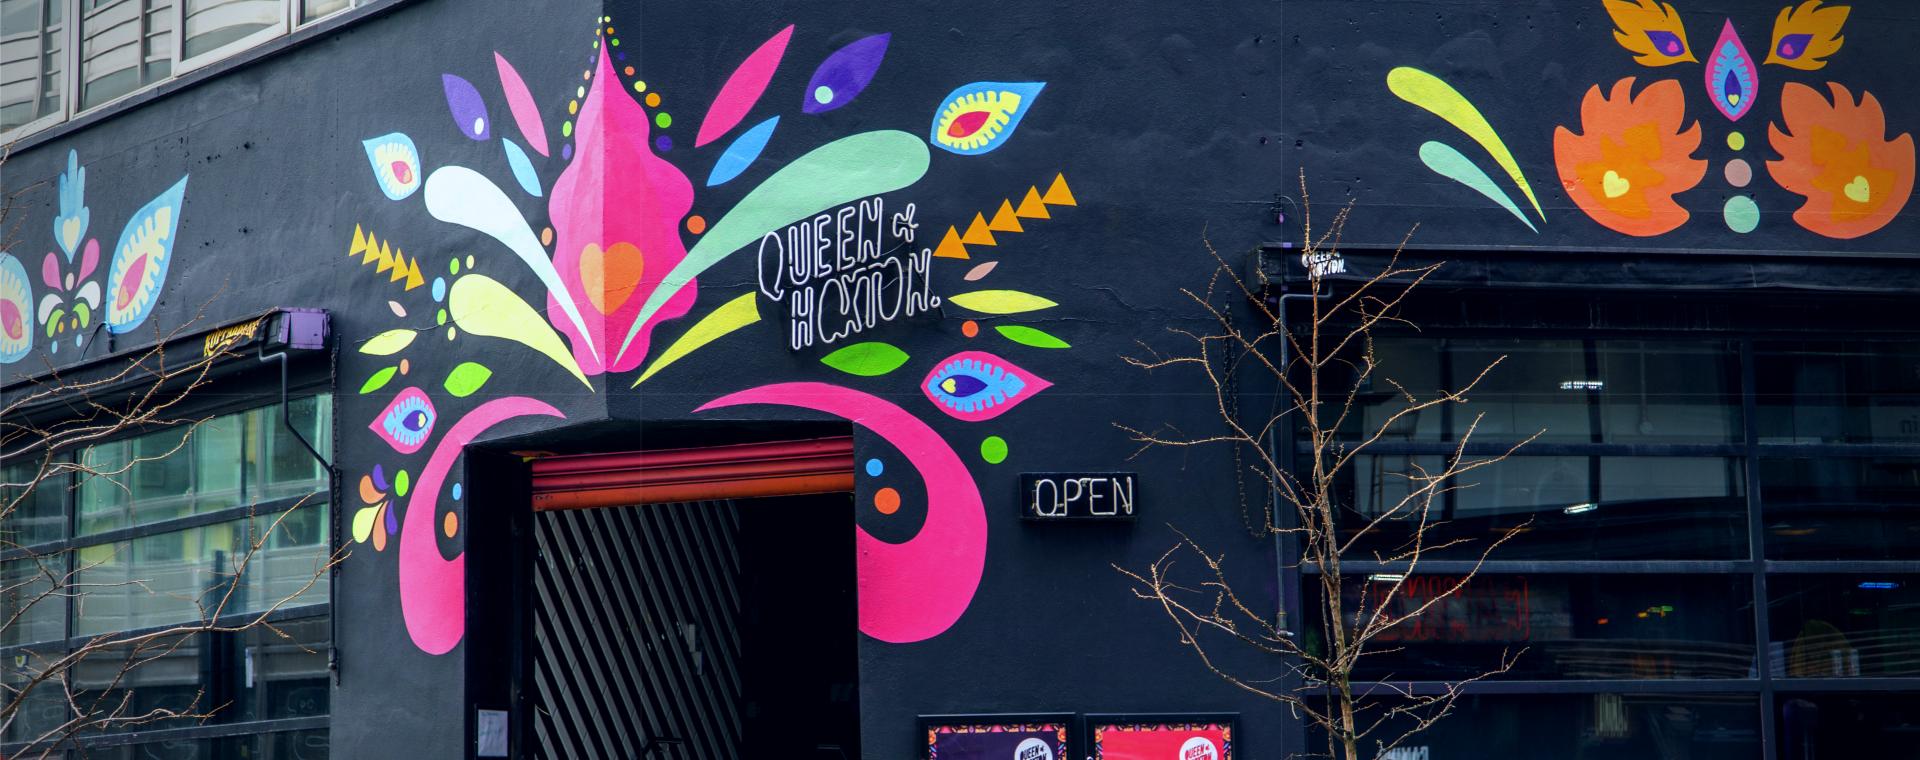 Brightly coloured frontage of The Queen of Hoxton, a roof-top bar in Shoreditch